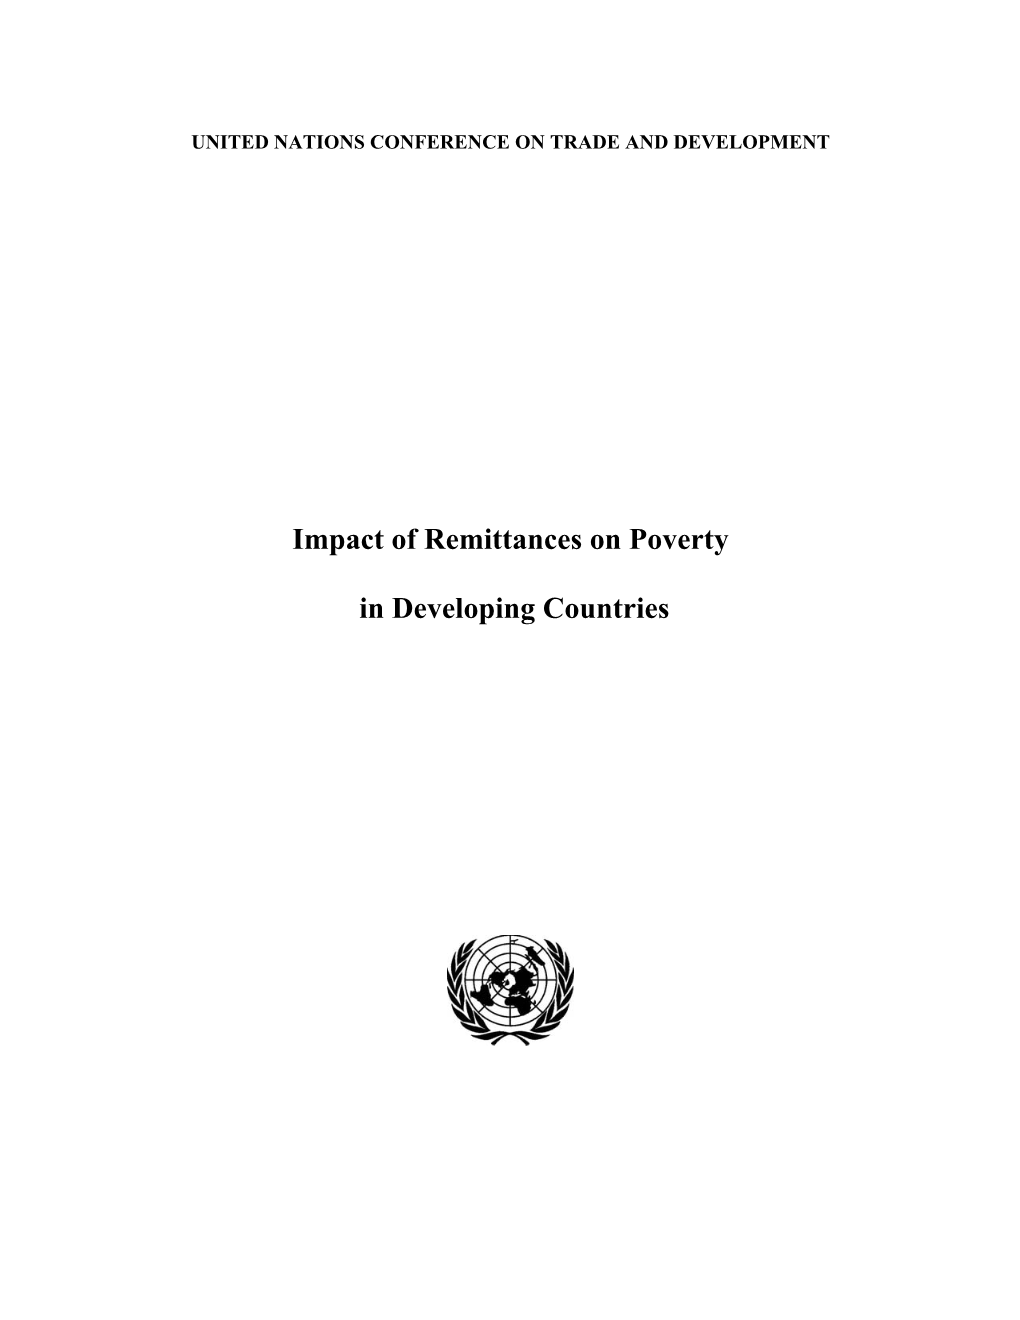 Impact of Remittances on Poverty in Developing Countries: Empirical Analysis